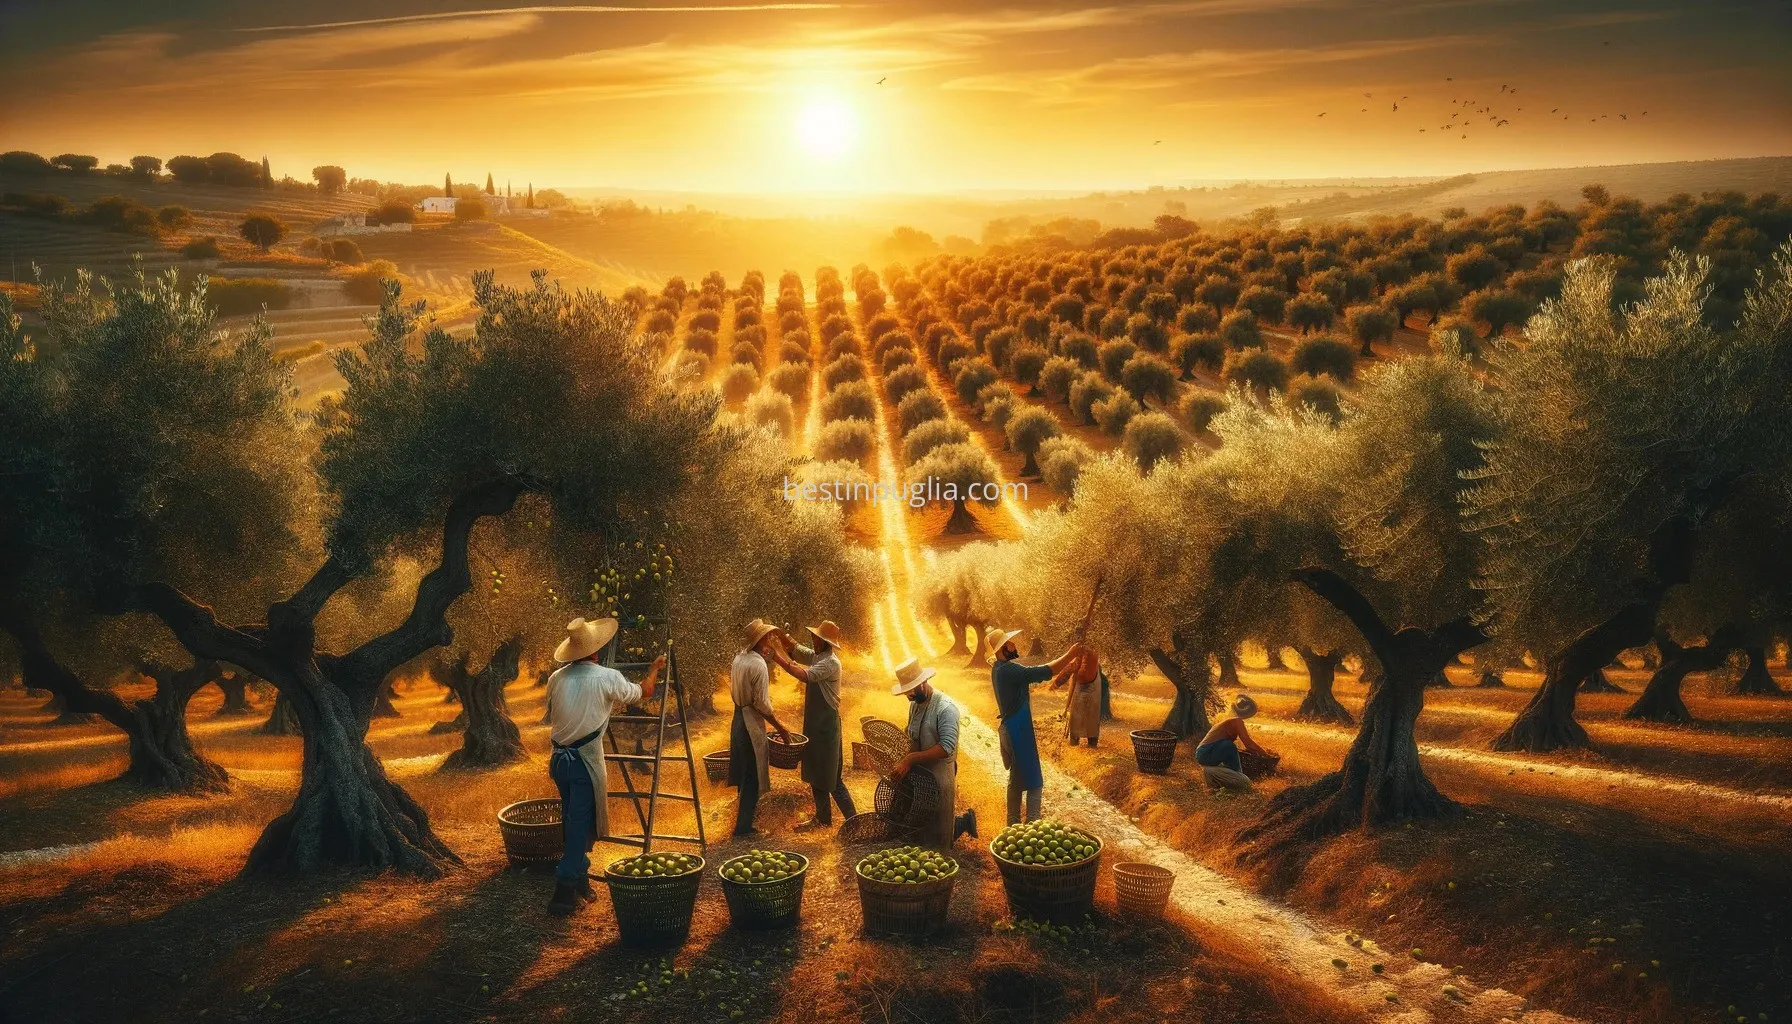 Live the Experience of Harvesting Olives